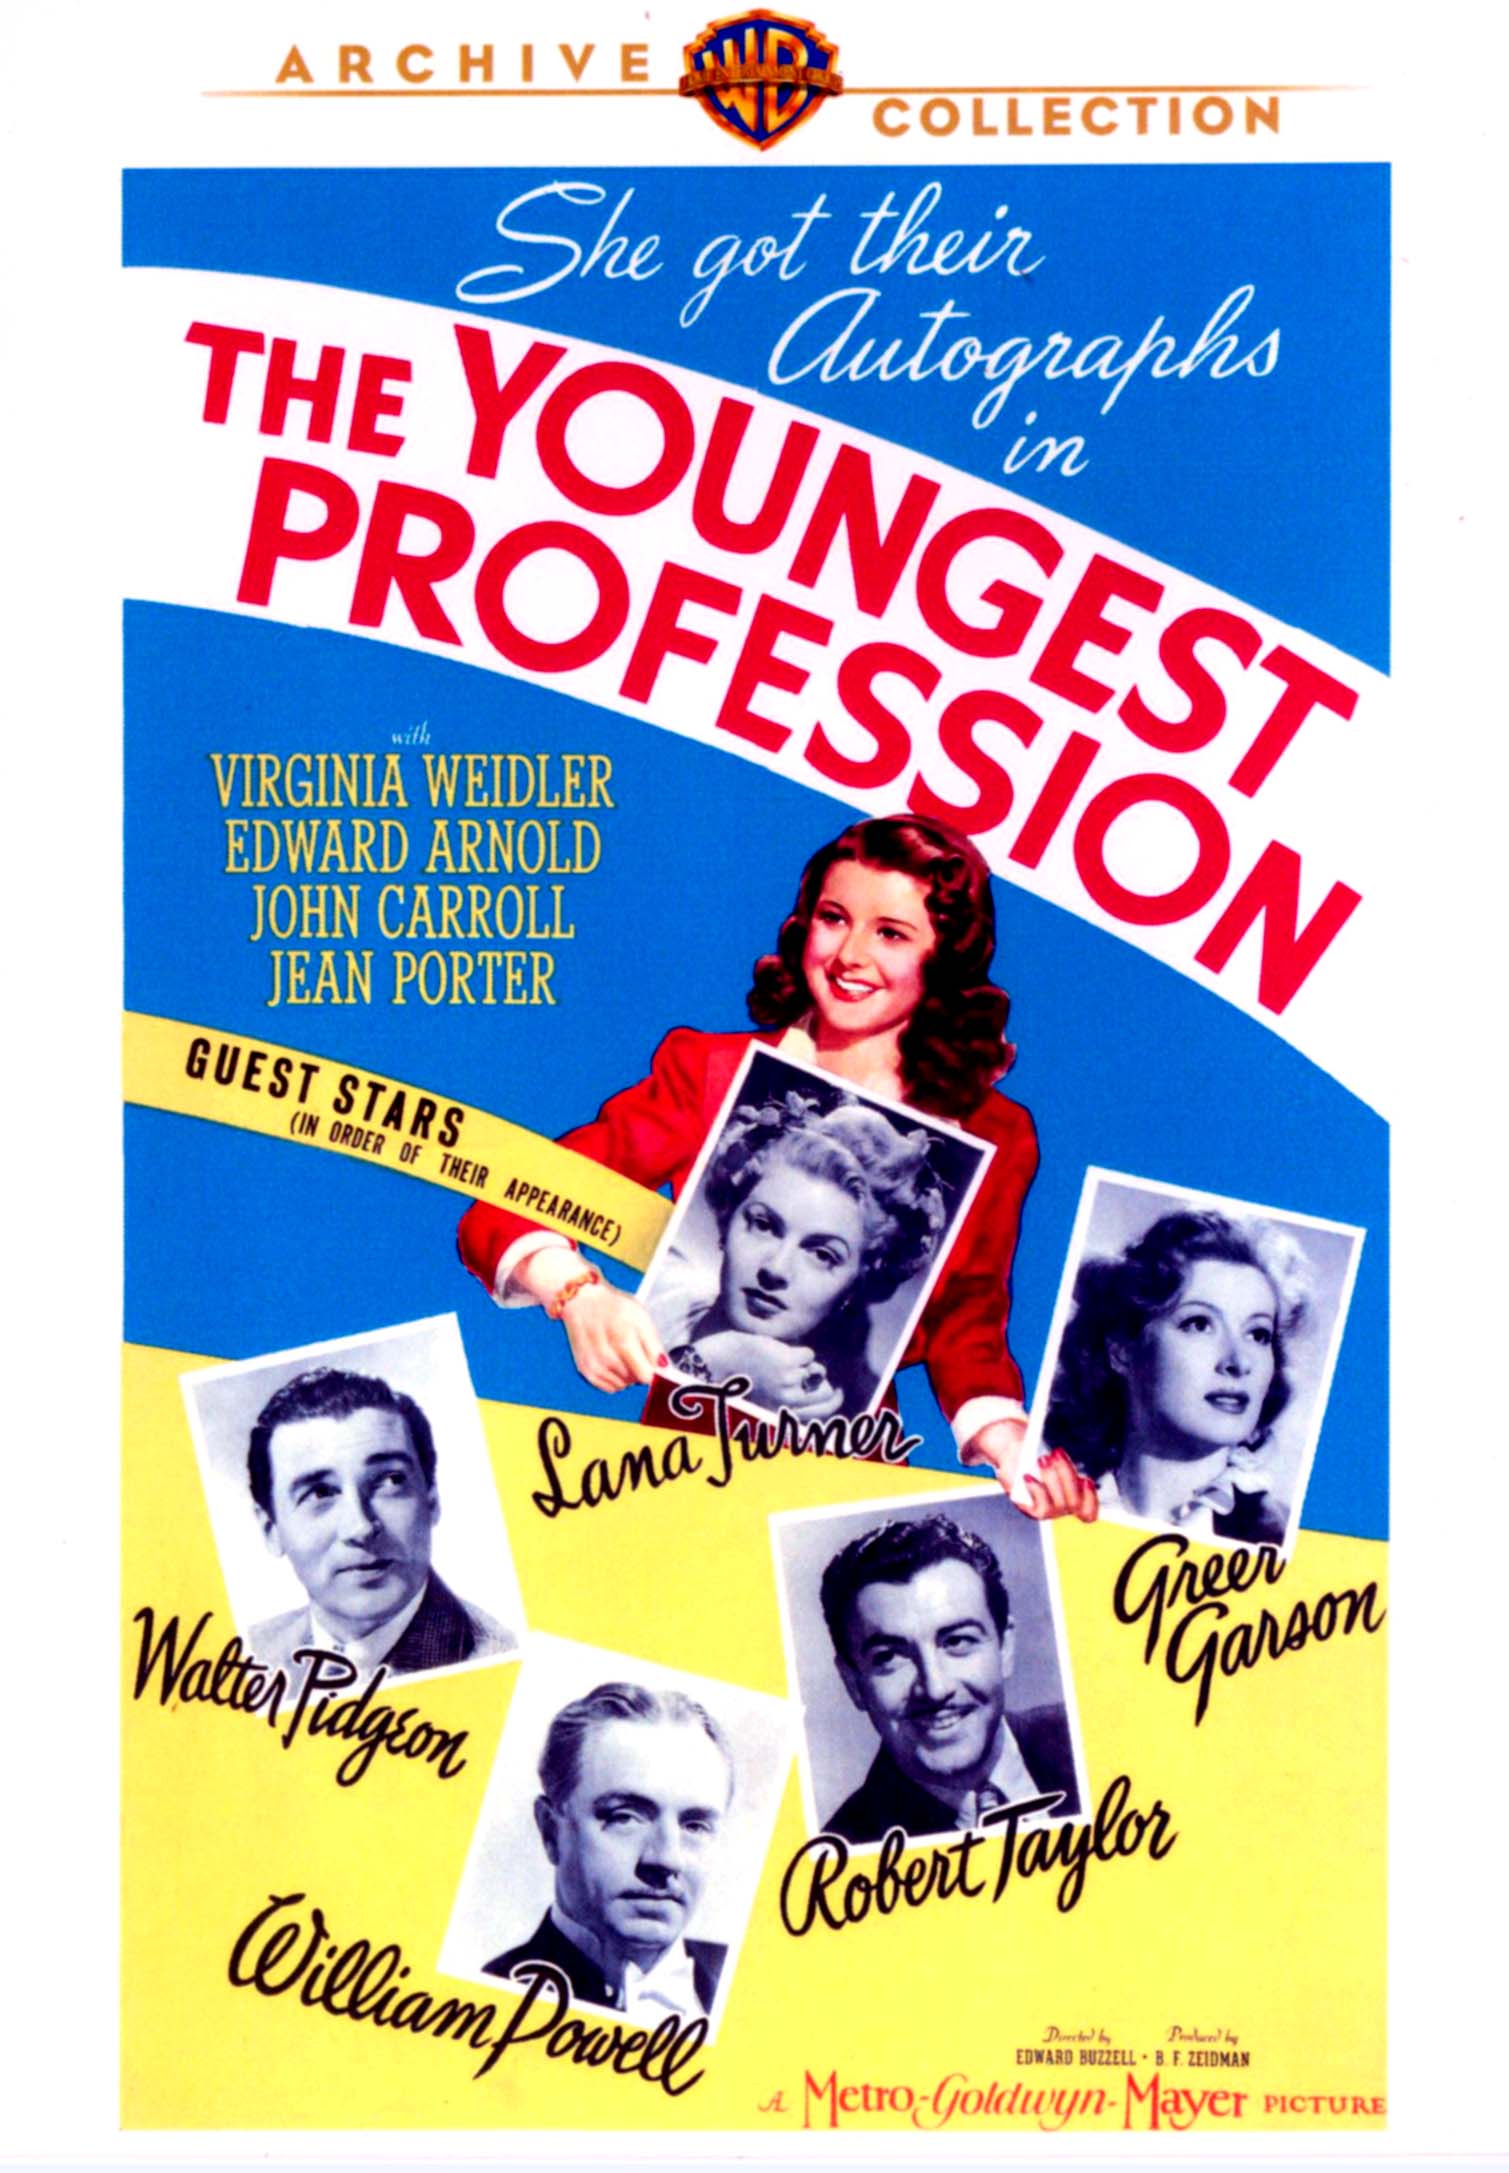 Youngest Profession cover art